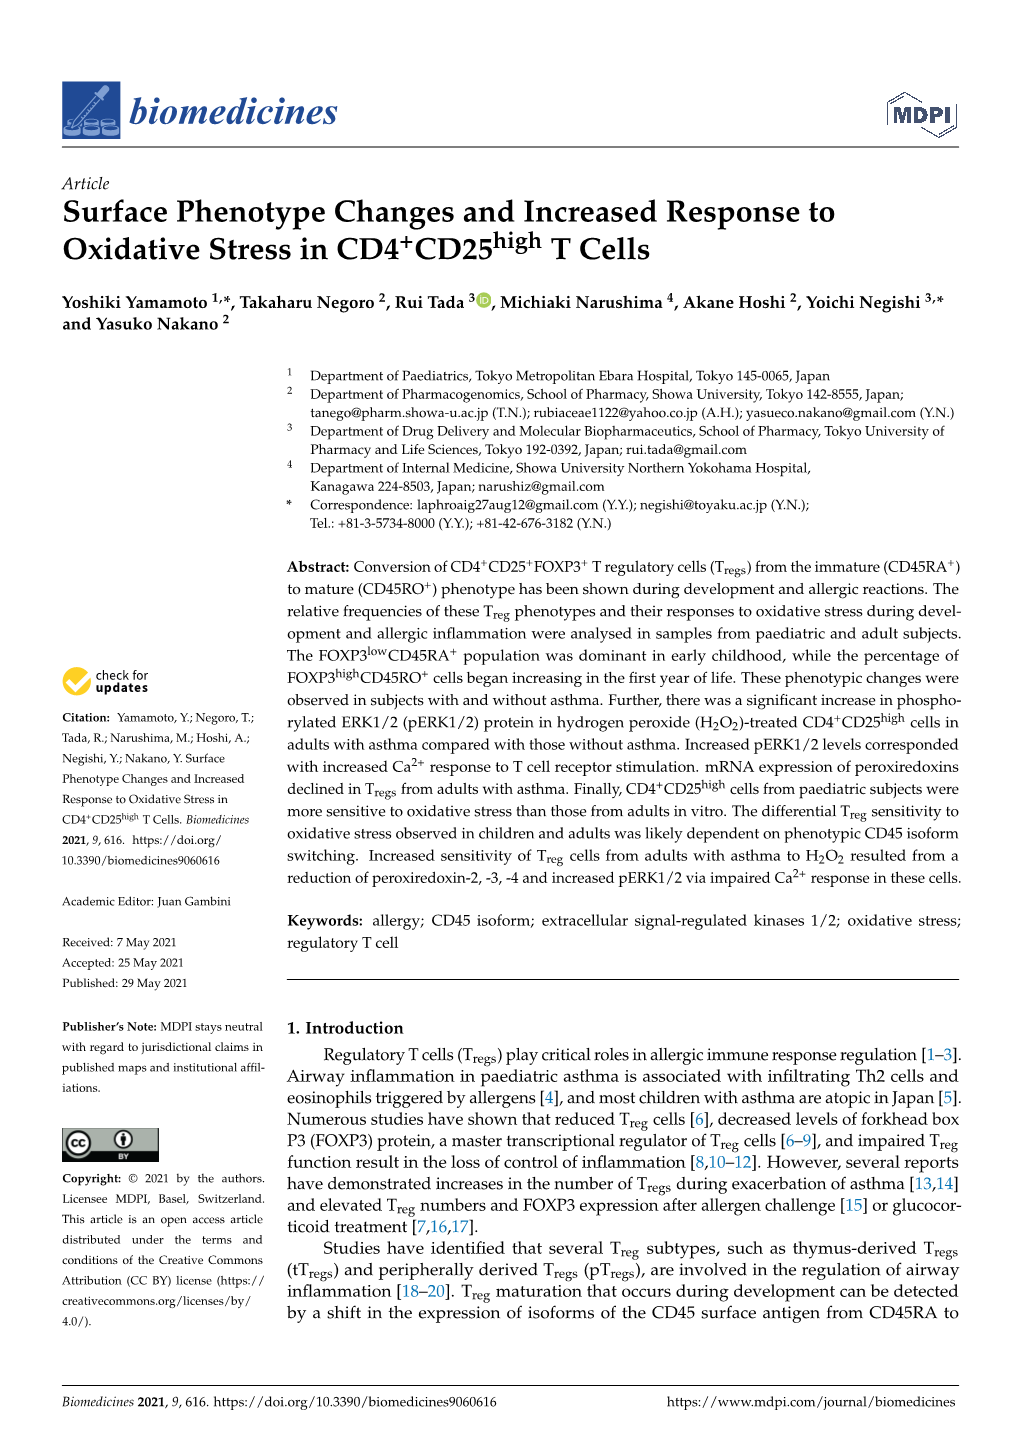 Surface Phenotype Changes and Increased Response to Oxidative Stress in CD4+Cd25high T Cells